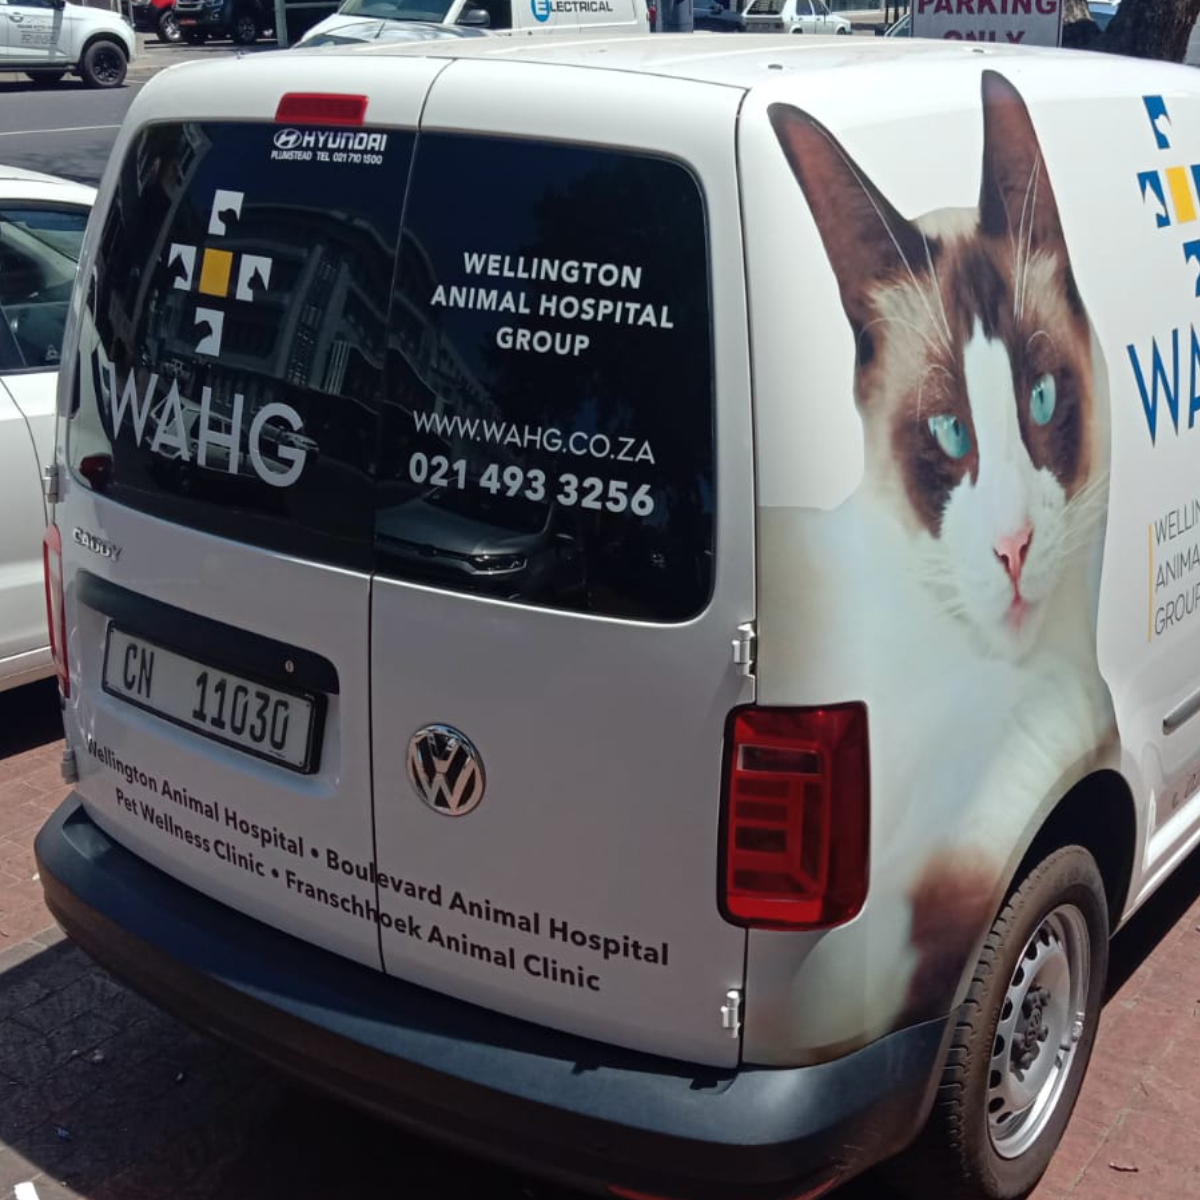 Wellington Animal Hospital Group - Vehicle Branding Conta or One Way Vision Vehicle Back tailgate Partial wrap